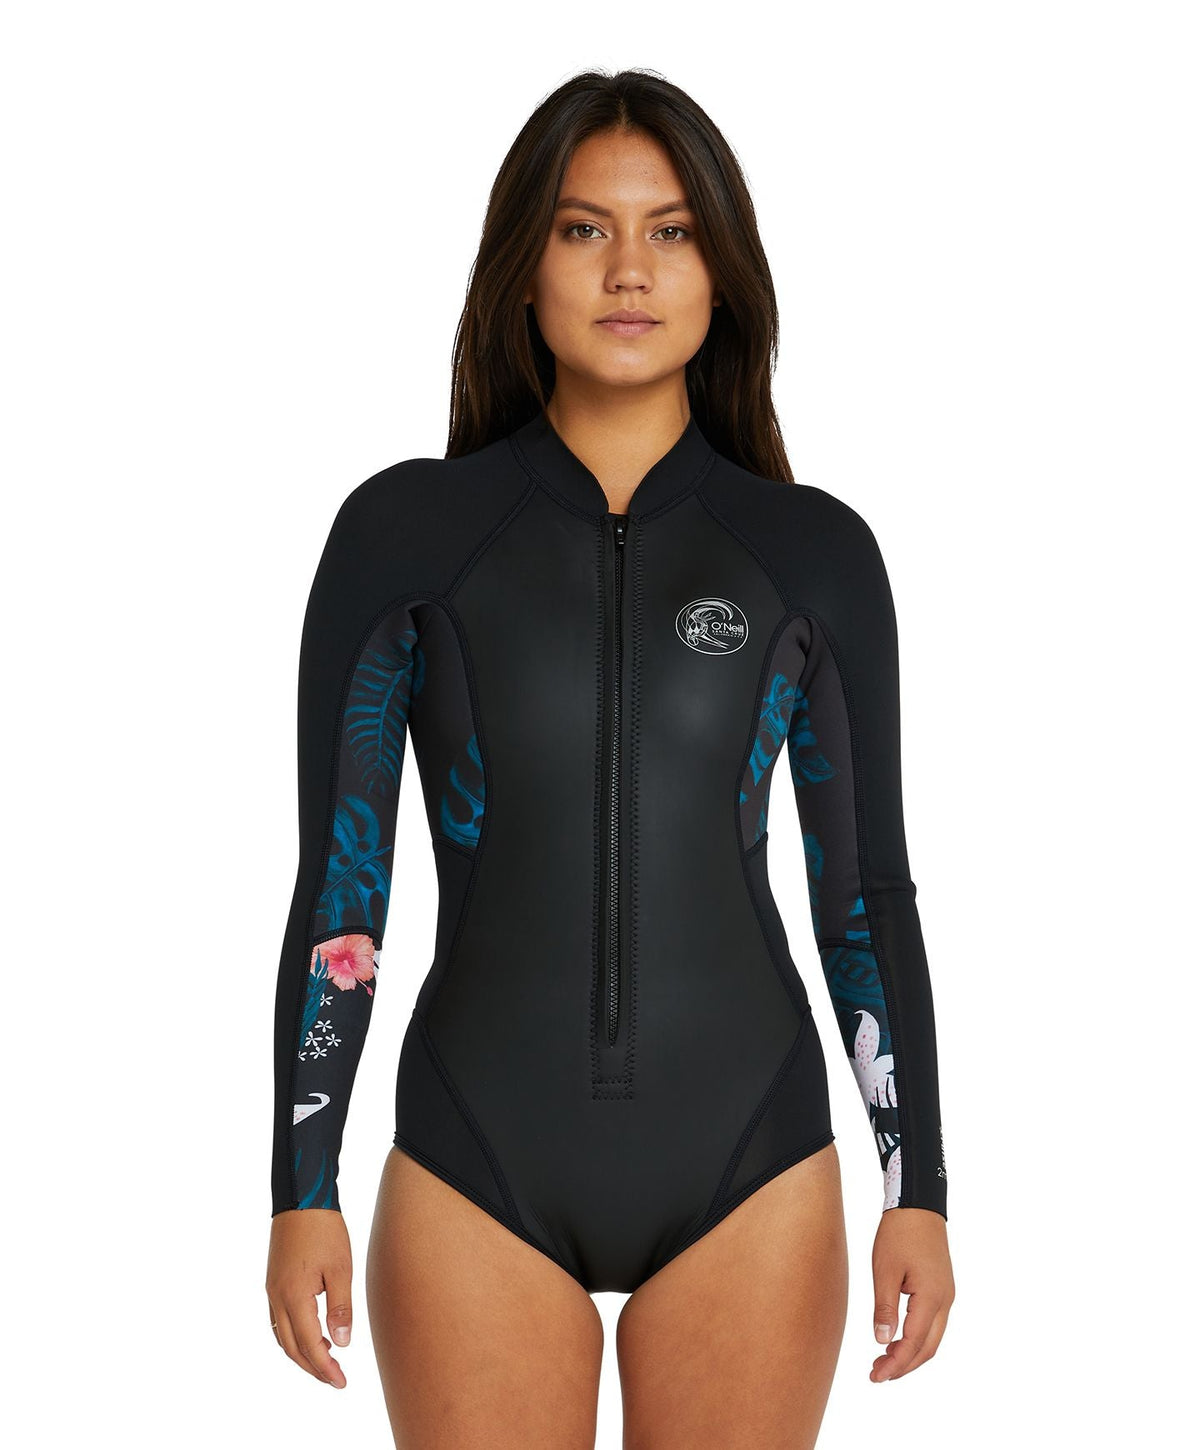 Women's Cruise FZ LS Cheeky Spring Suit 2mm Wetsuit - Black Hibiscus